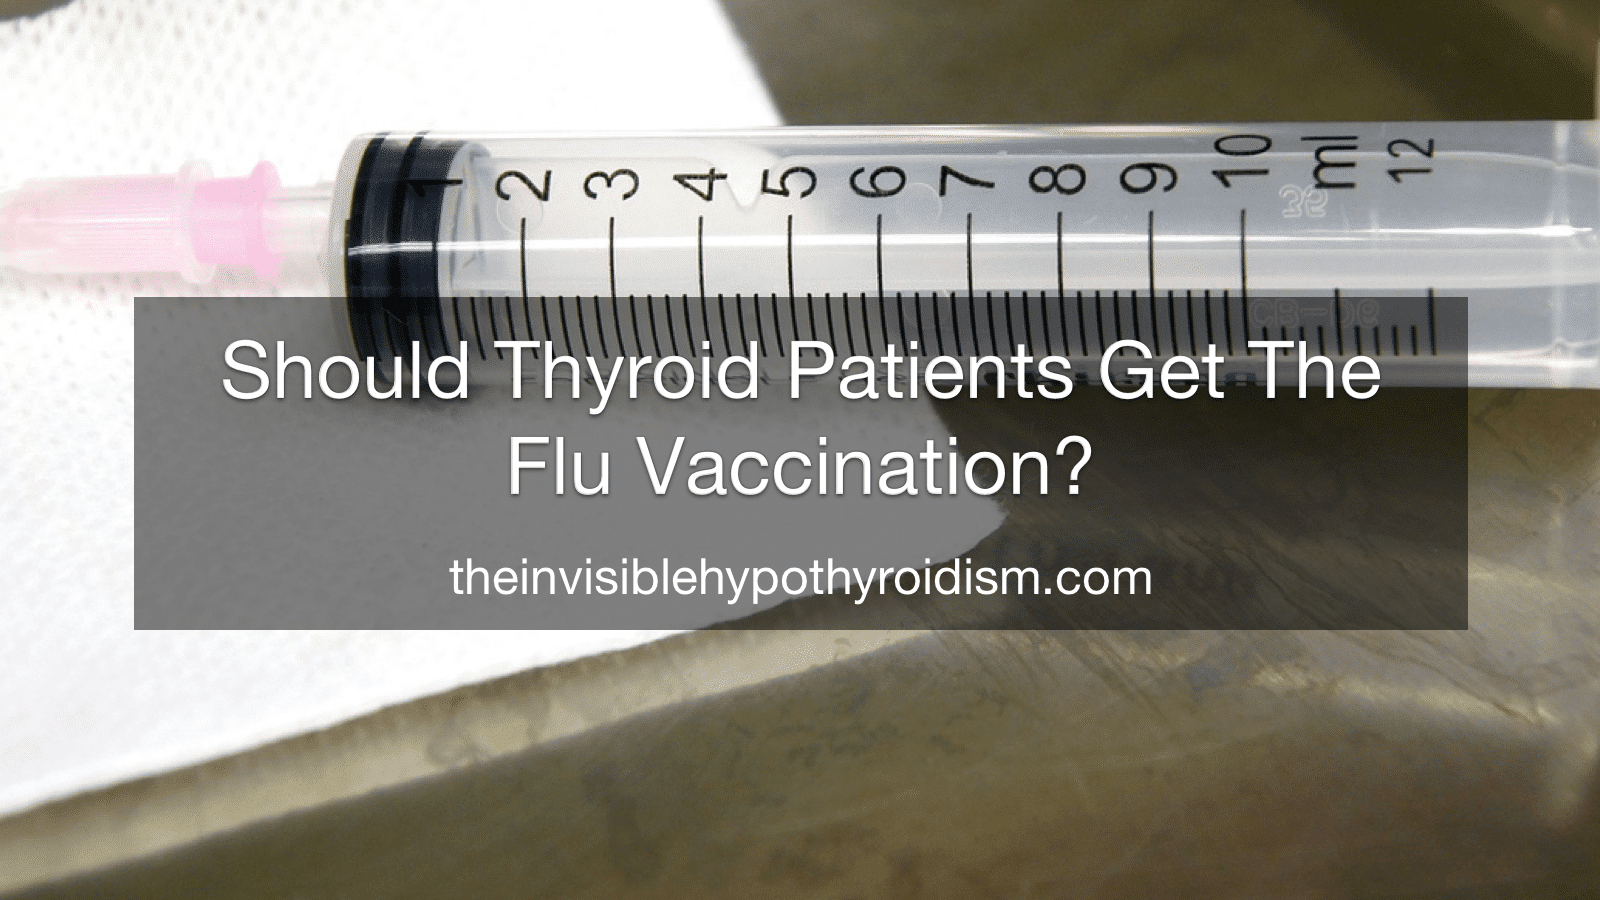 Should Thyroid Patients Get The Flu Vaccination?